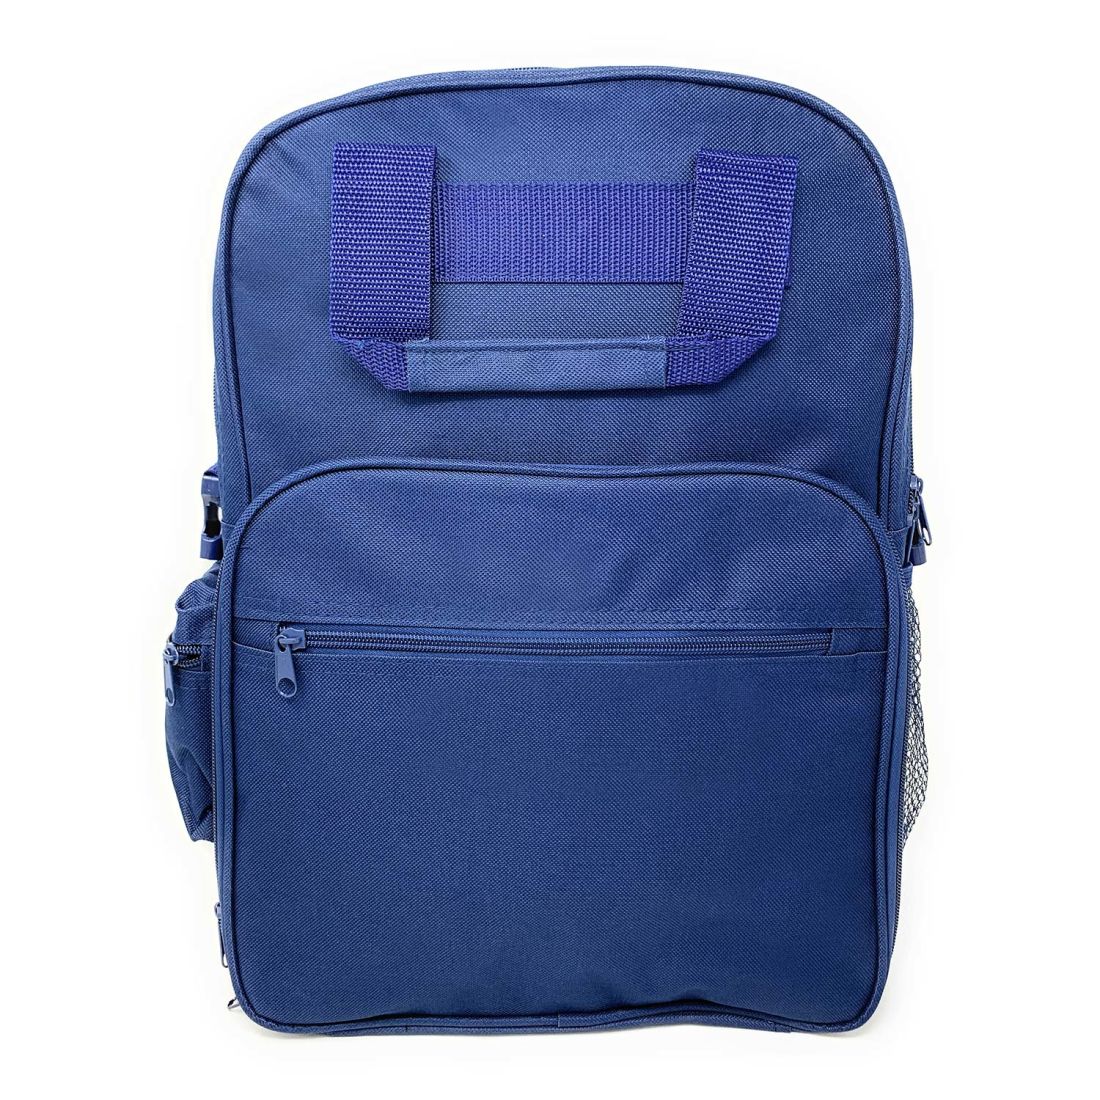 Modern School Backpack Bag with Double Straps and Handles-Campus-Wardrobe